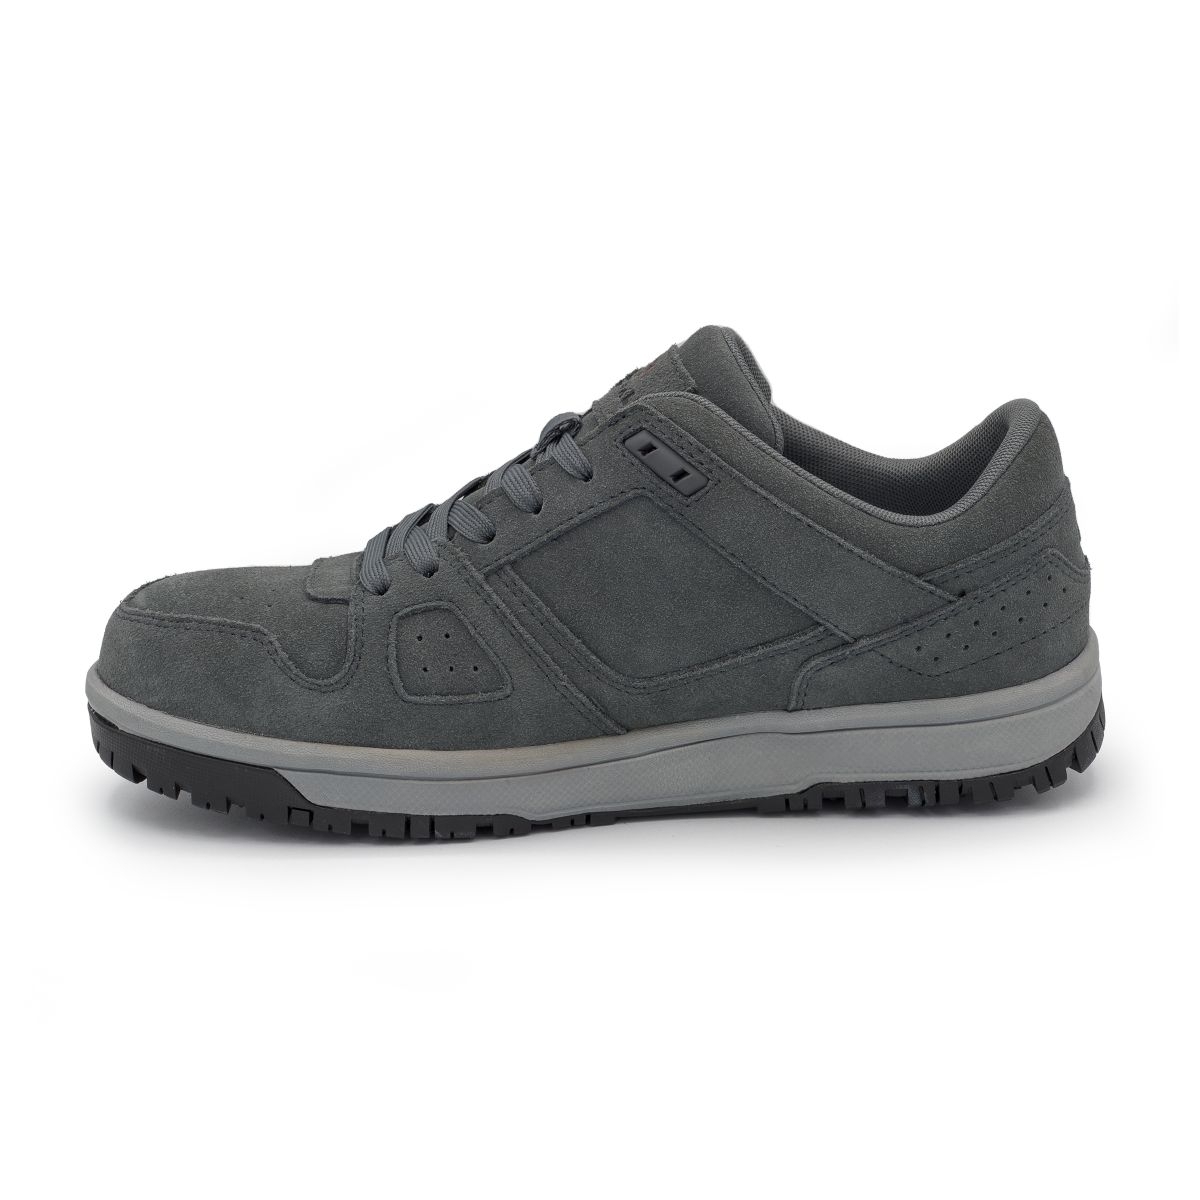 AIRWALK SAFETY Men's Mongo Composite Toe EH Work Shoe Charcoal/Grey - AW6301 CHARCOAL/GRAY - CHARCOAL/GRAY, 10.5-W